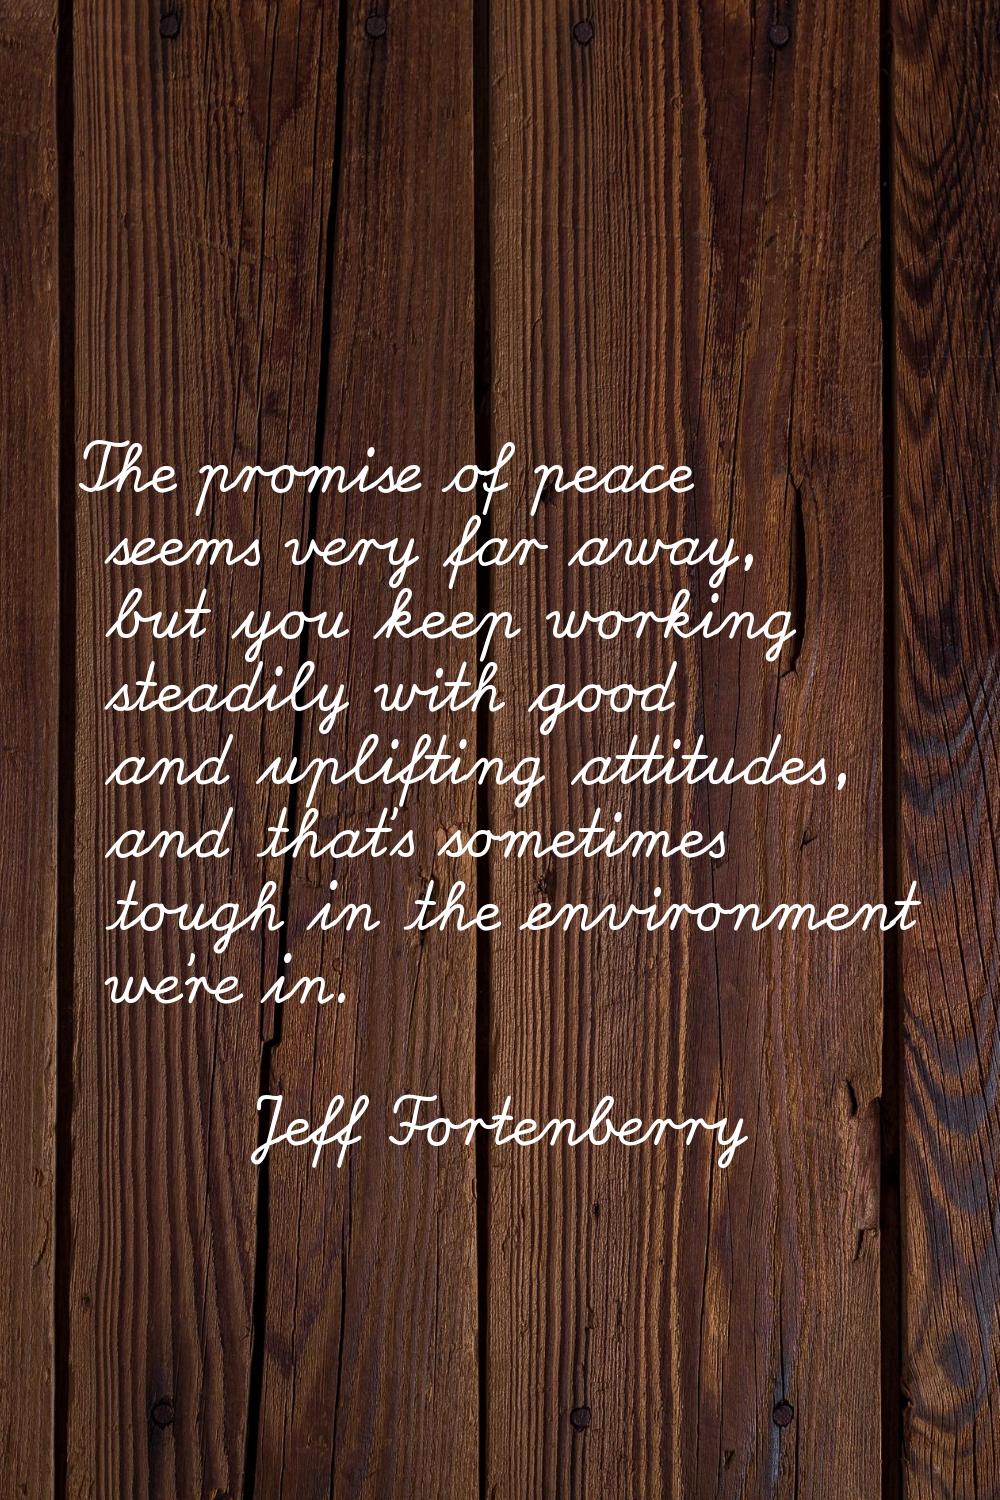 The promise of peace seems very far away, but you keep working steadily with good and uplifting att